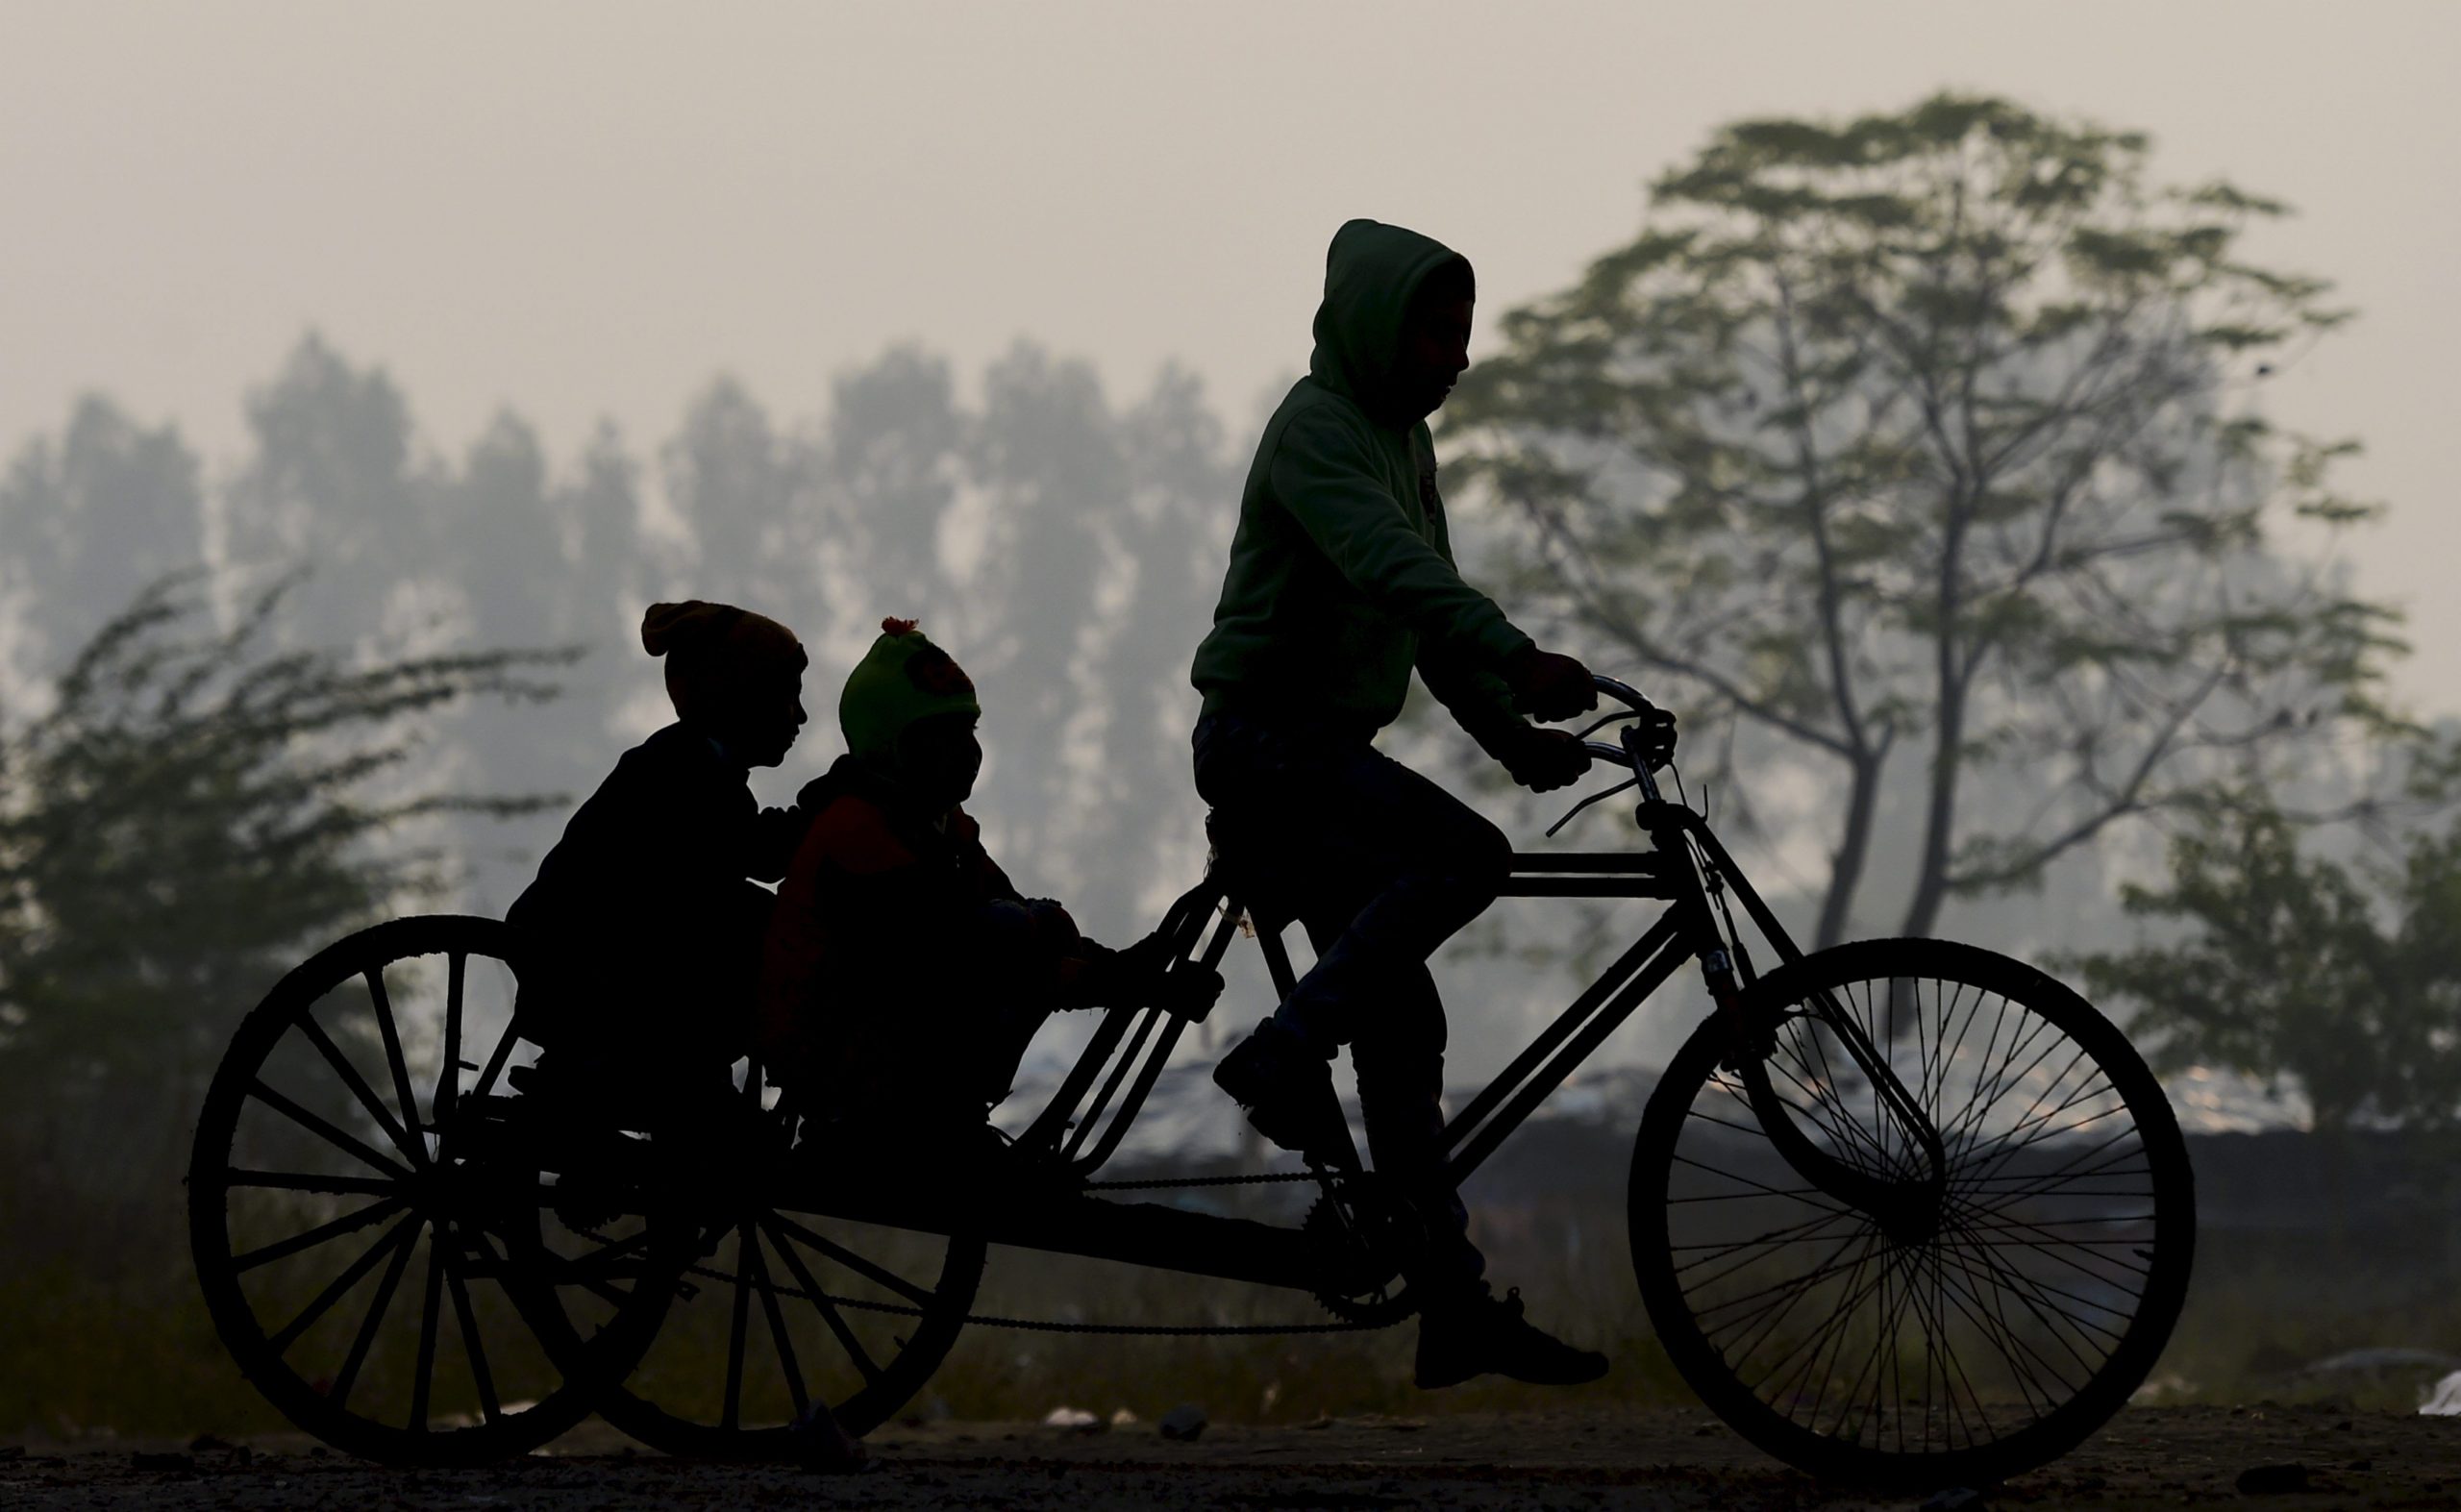 Delhi to remain cold from New Year till January 3: IMD